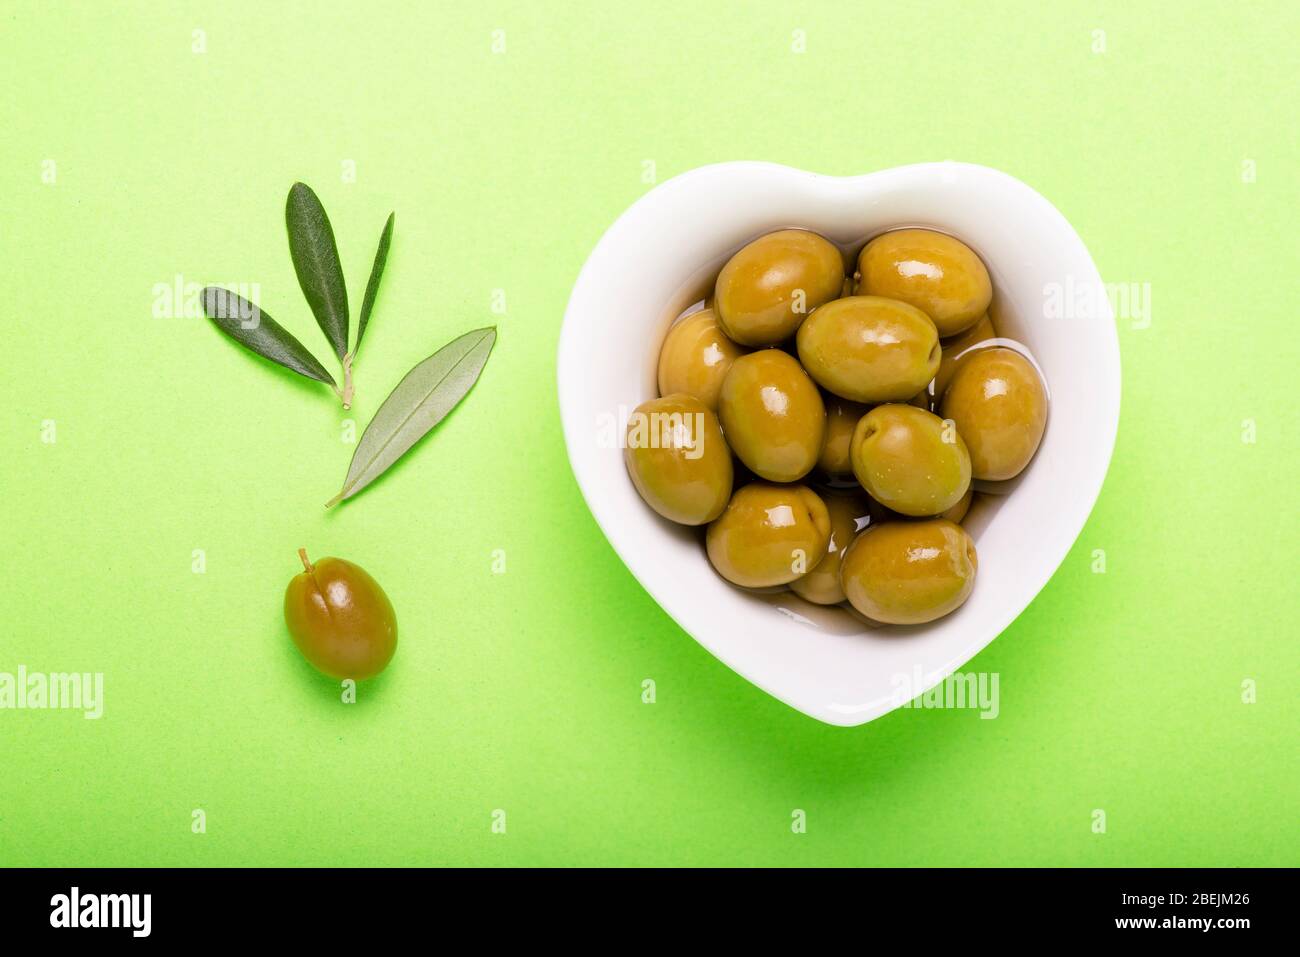 top view, on the green uniform background, white ceramic heart-shaped bowl with pickled olives Stock Photo